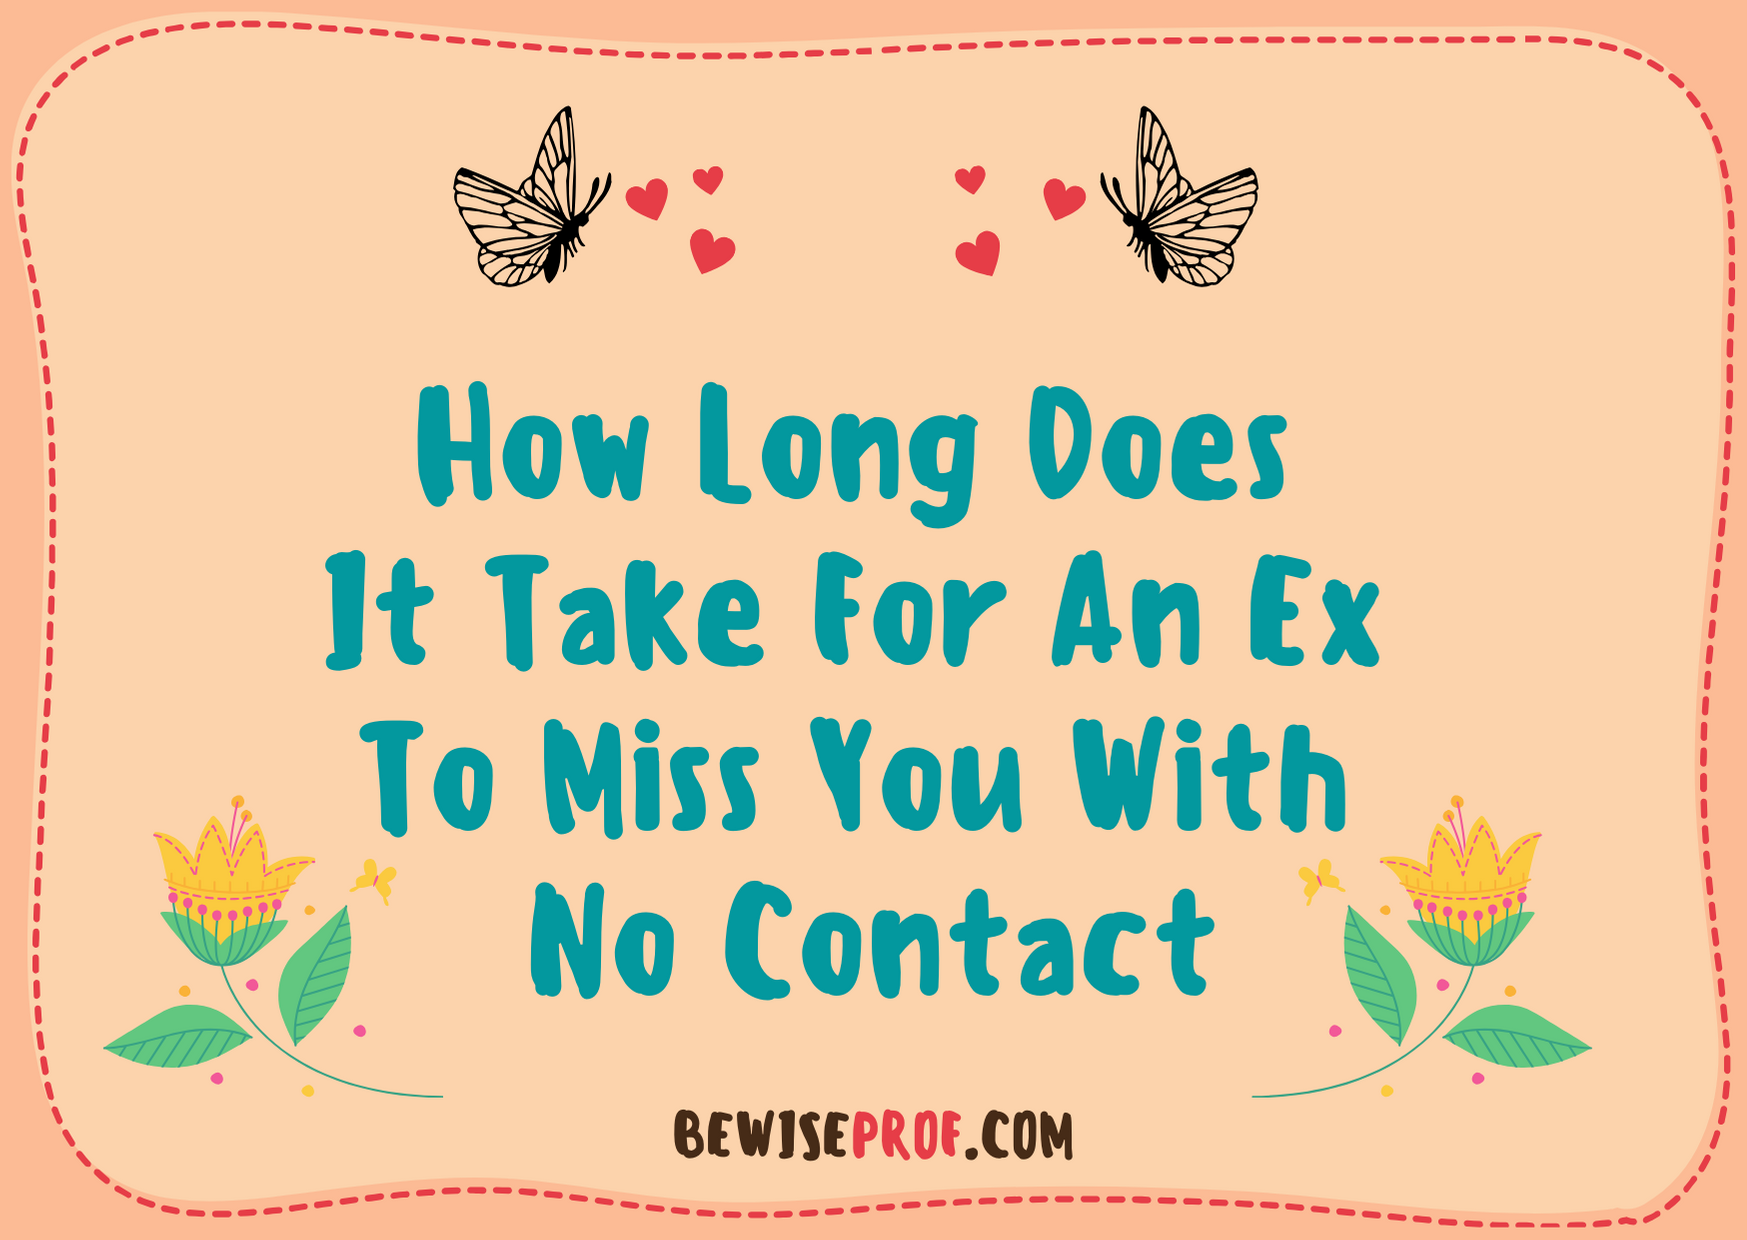 How Long Does It Take For An Ex To Miss You With No Contact